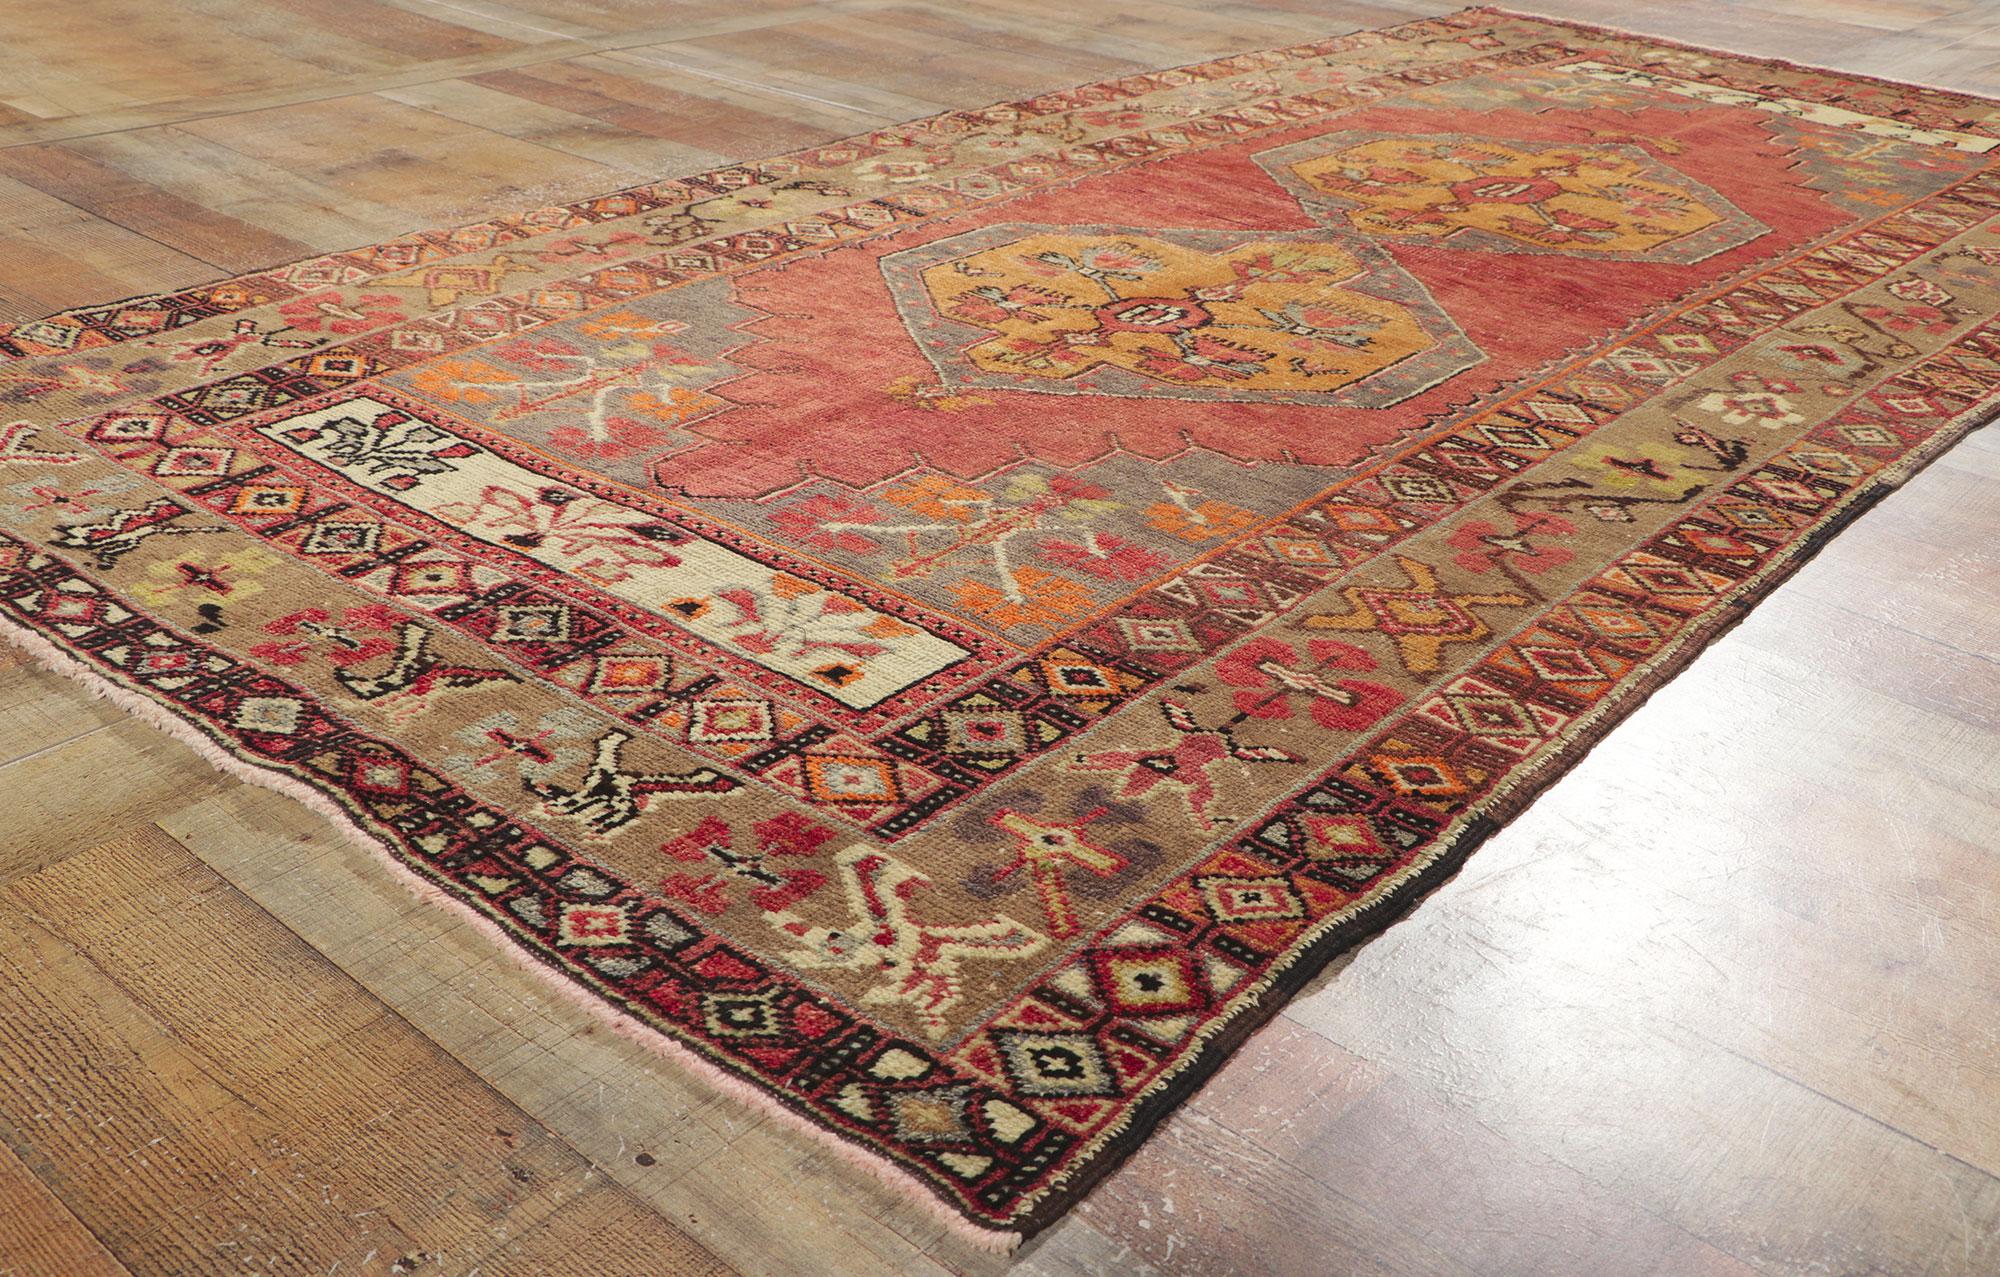 Vintage Turkish Oushak Rug Runner with Rustic Earth-Tone Colors In Good Condition For Sale In Dallas, TX